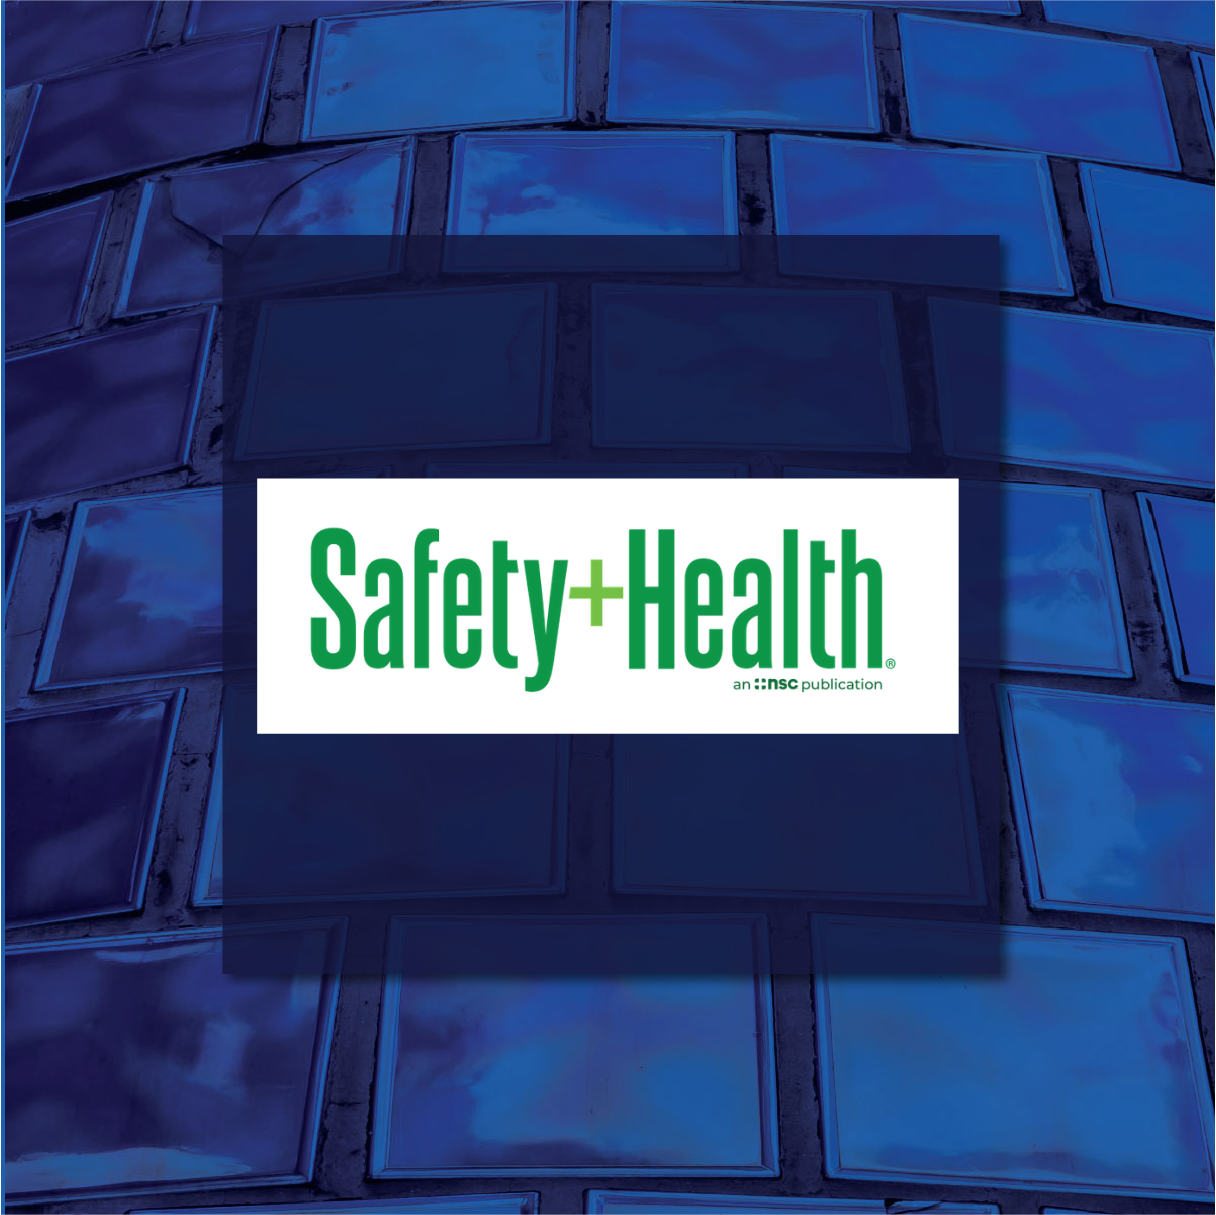 New KPA compliance safety story in Safety+Health